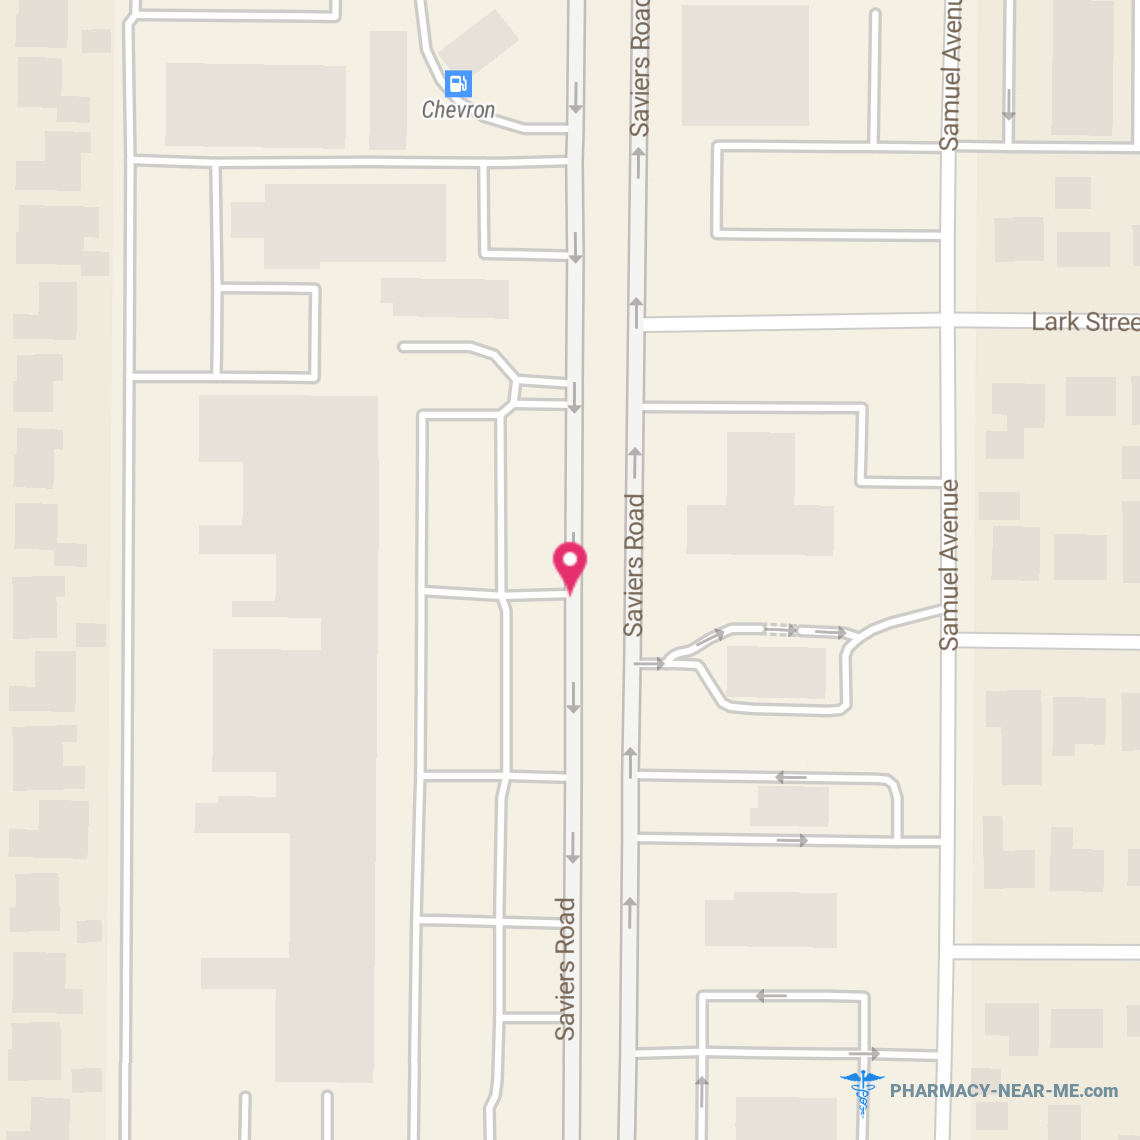 STANS DRUGS - Pharmacy Hours, Phone, Reviews & Information: 3001 Saviers Road, Oxnard, California 93033, United States